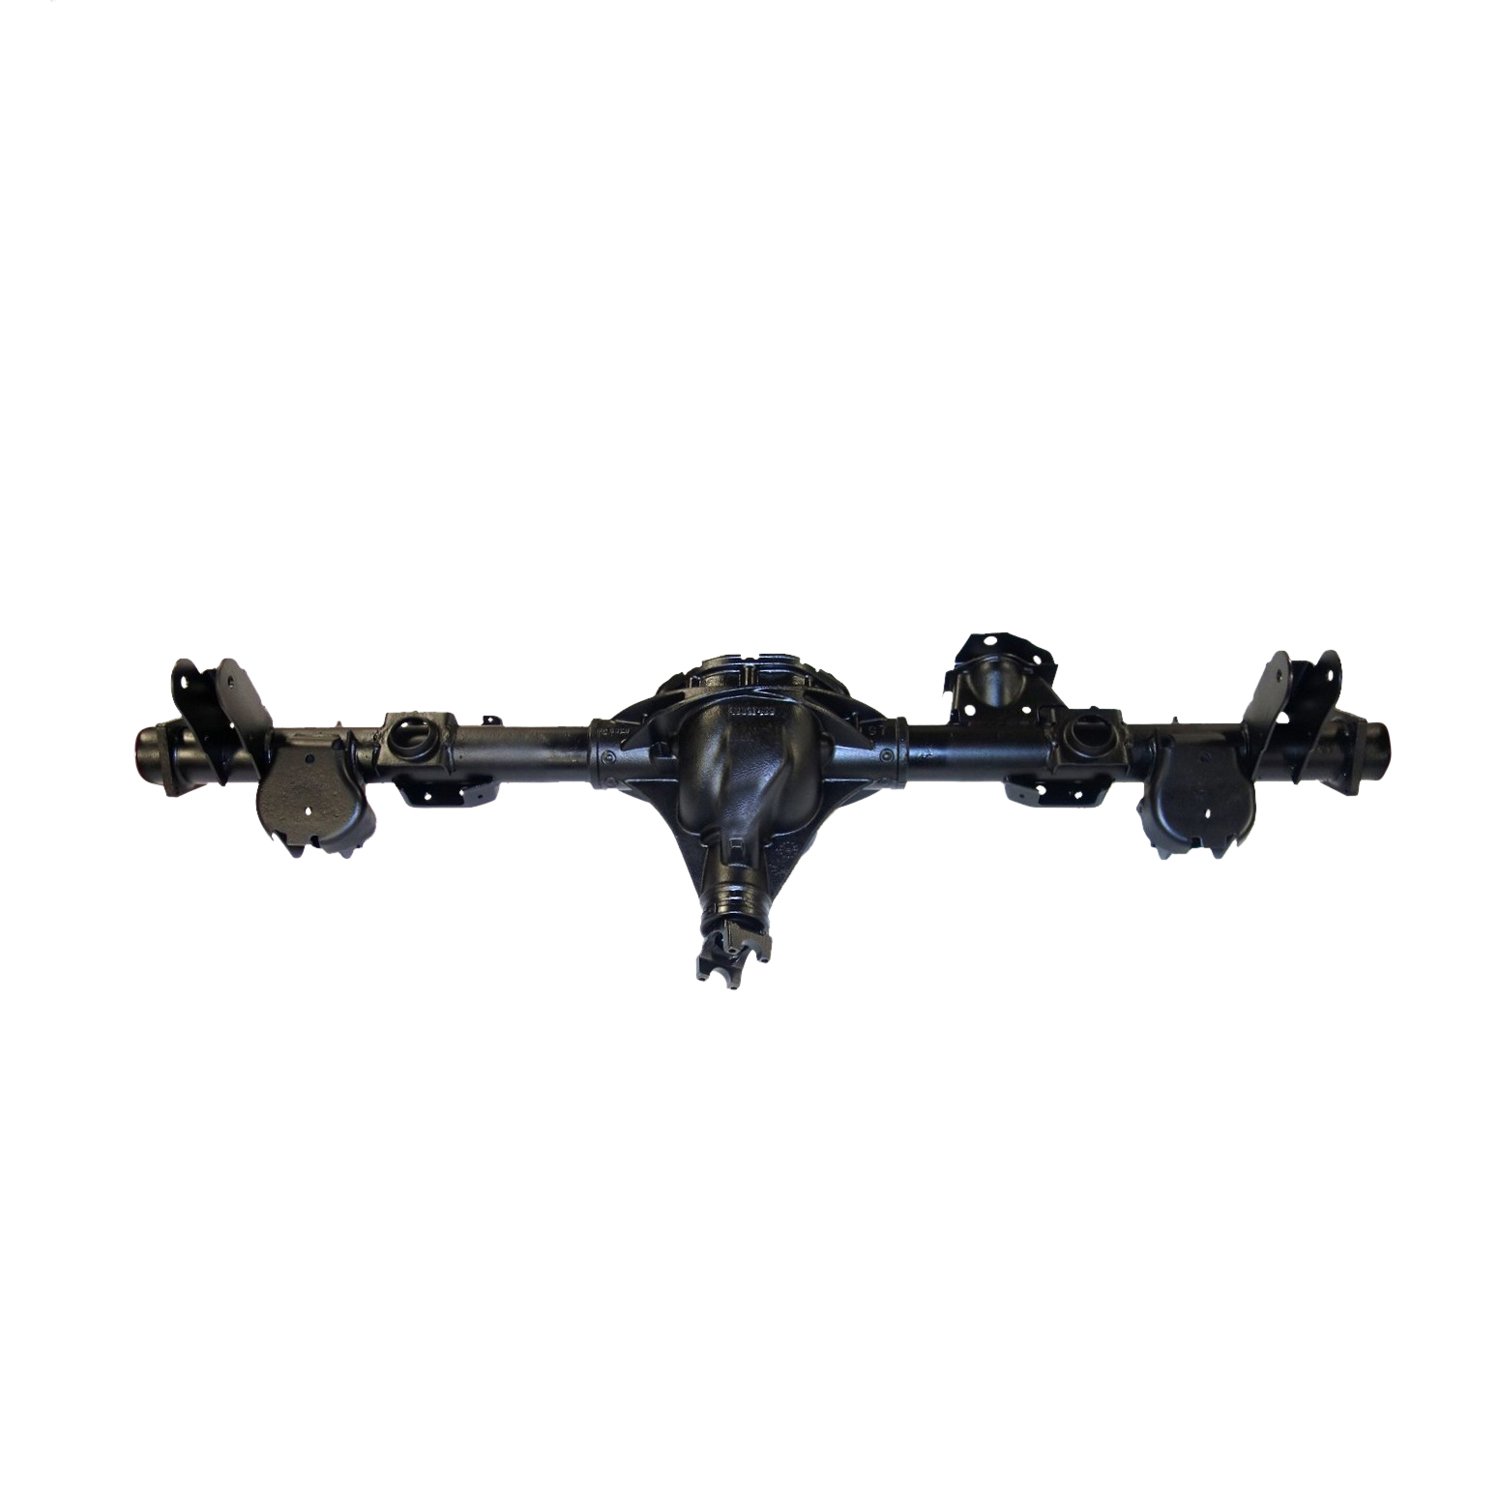 Remanufactured Axle Assembly for GM 8.6" 2007-08 GM Suburban 1500, 4.10 Rato, Posi